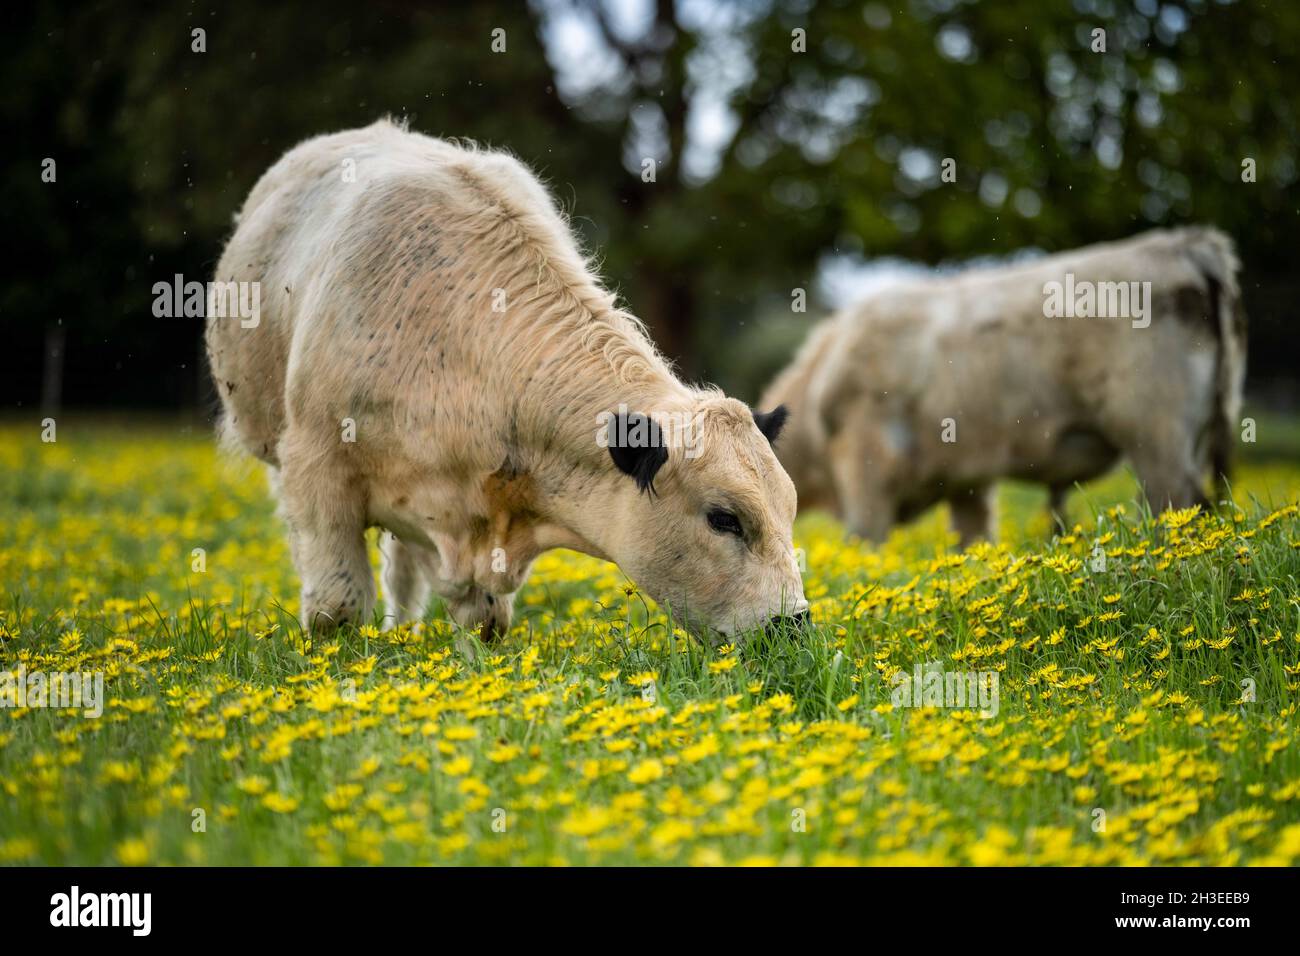 Close of Stud Beef bulls, cows and calves grazing on grass in a field, in Australia. breeds of cattle include speckle park, murray grey, angus, bra Stock Photo - Alamy